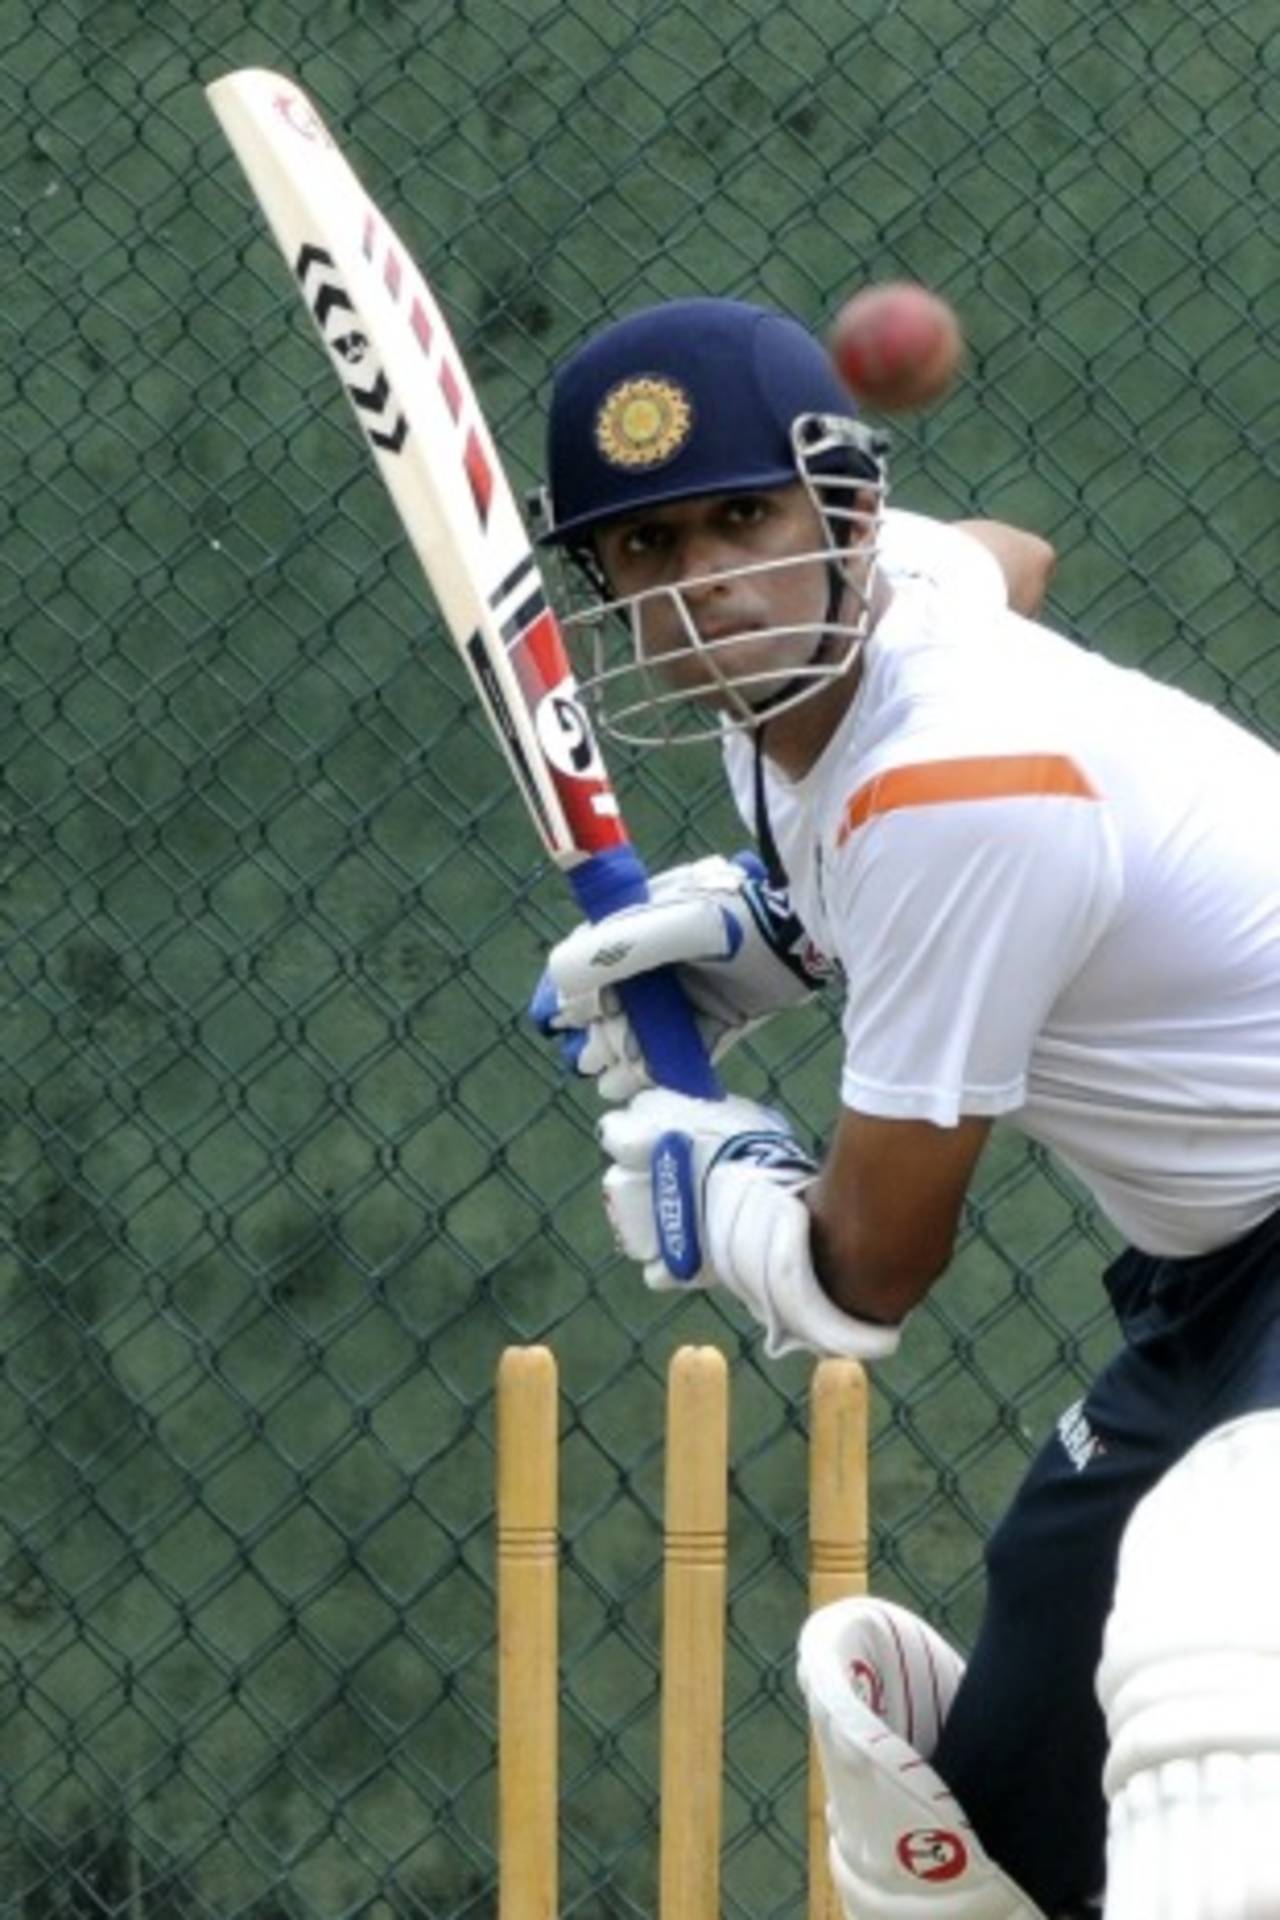 Rahul Dravid watches the ball closely during a net session, Colombo, July 24, 2010